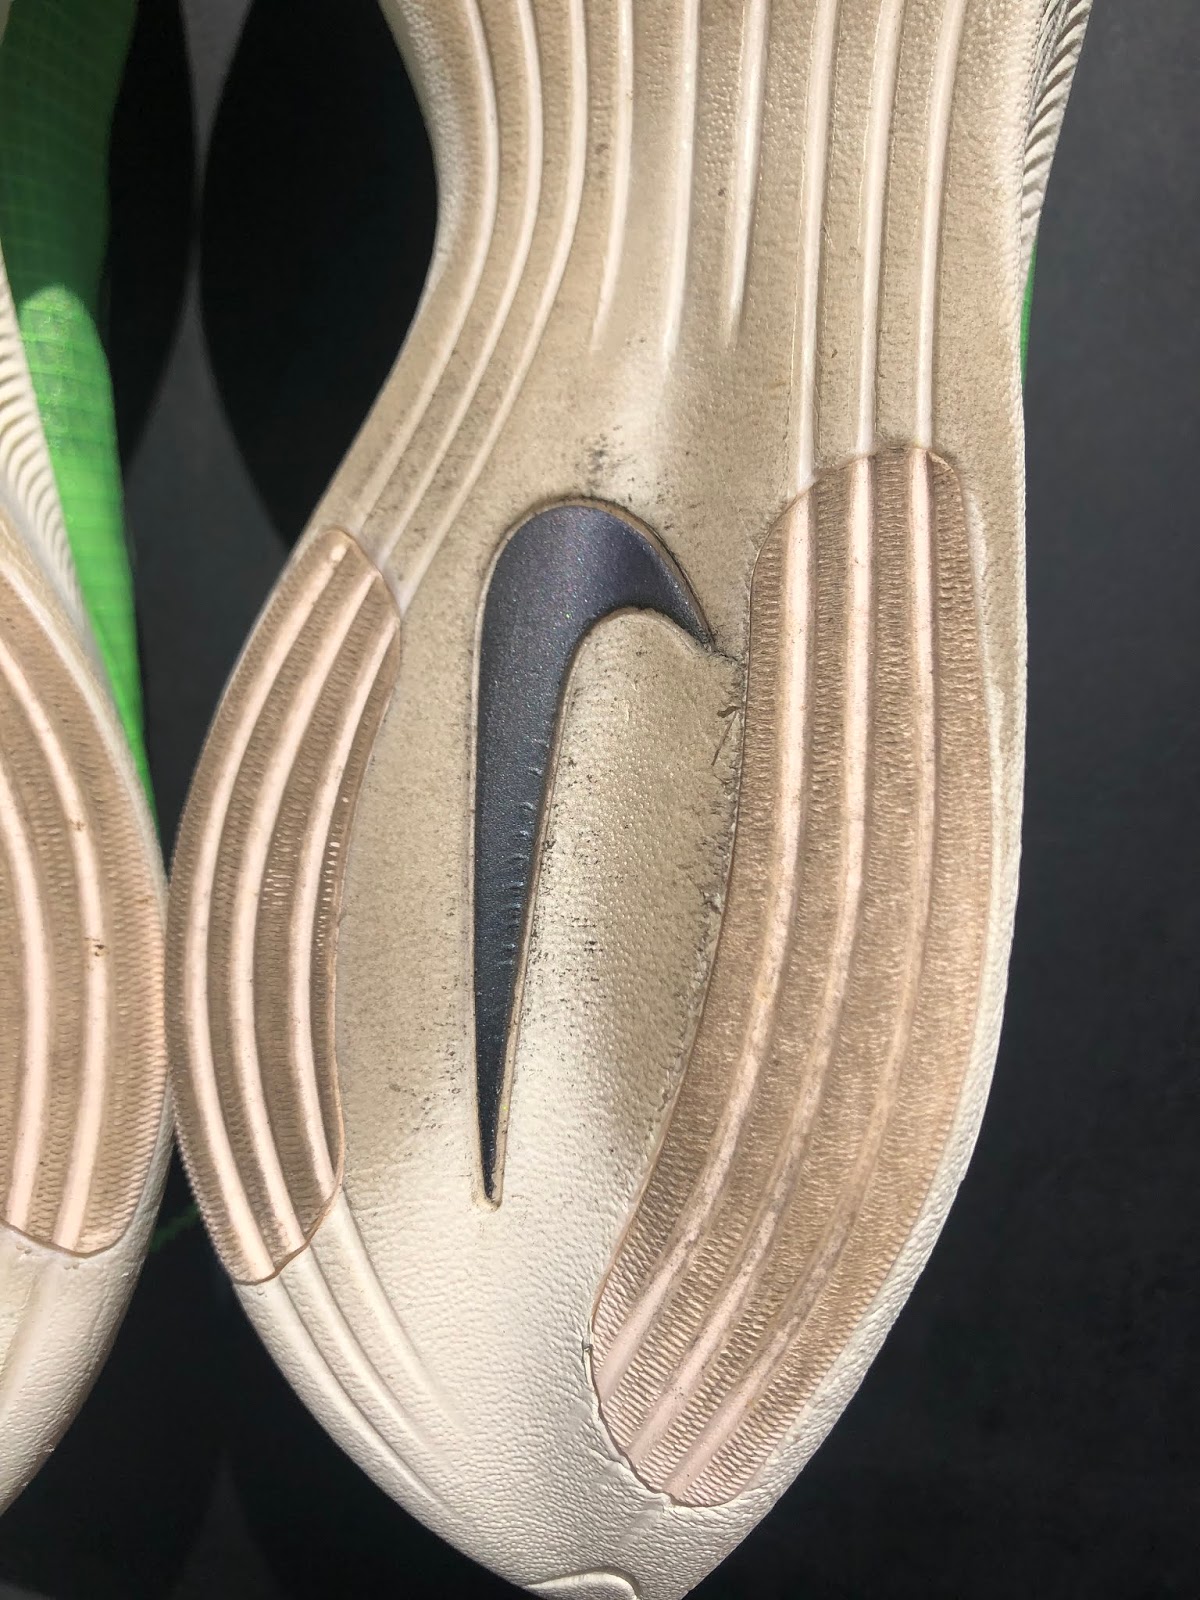 Nike Vaporfly Next% Review - DOCTORS OF RUNNING